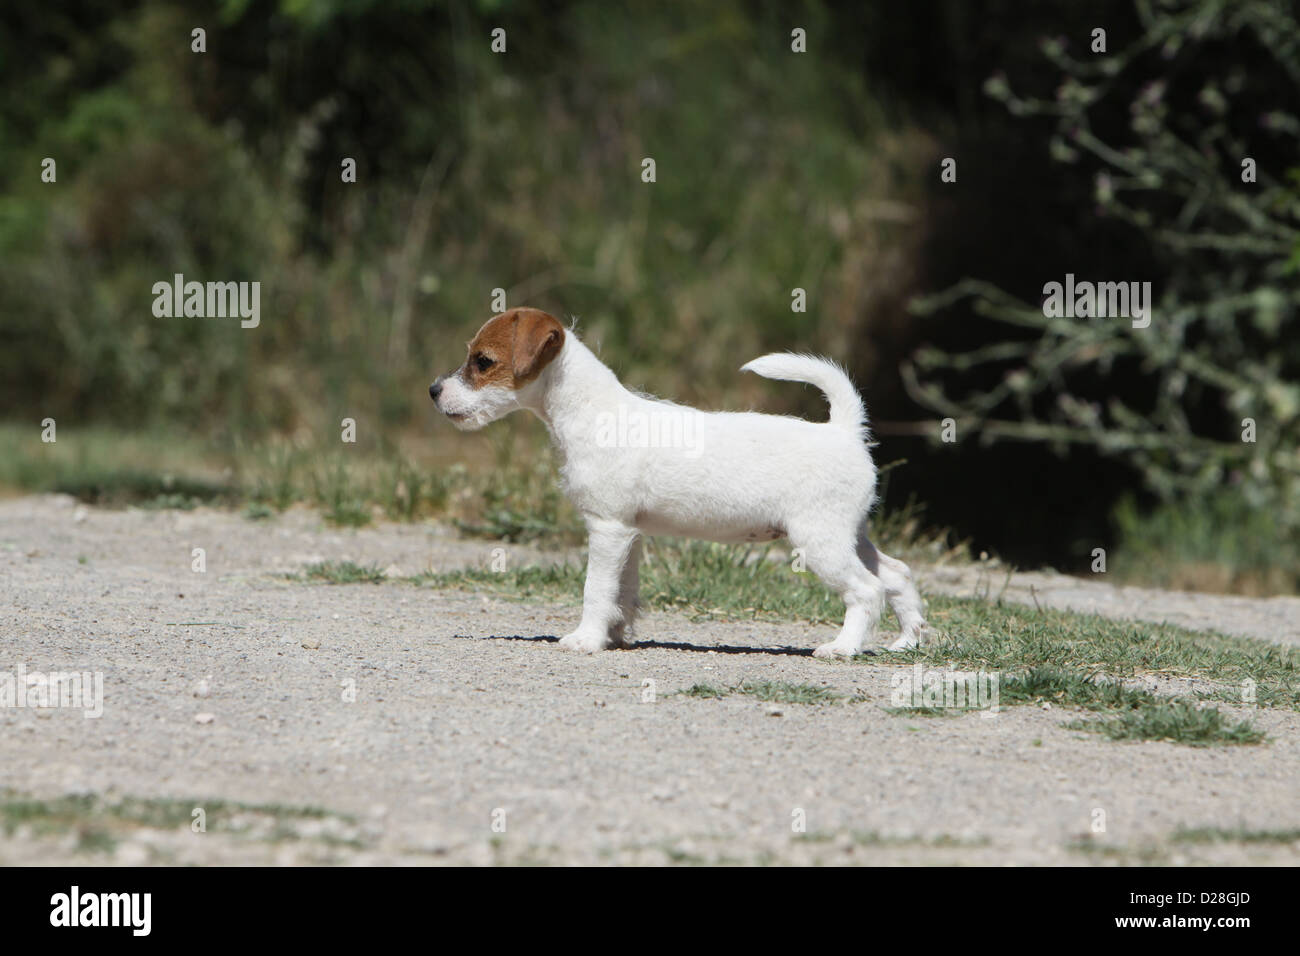 Dog Parson Russell Terrier  puppy standing Stock Photo